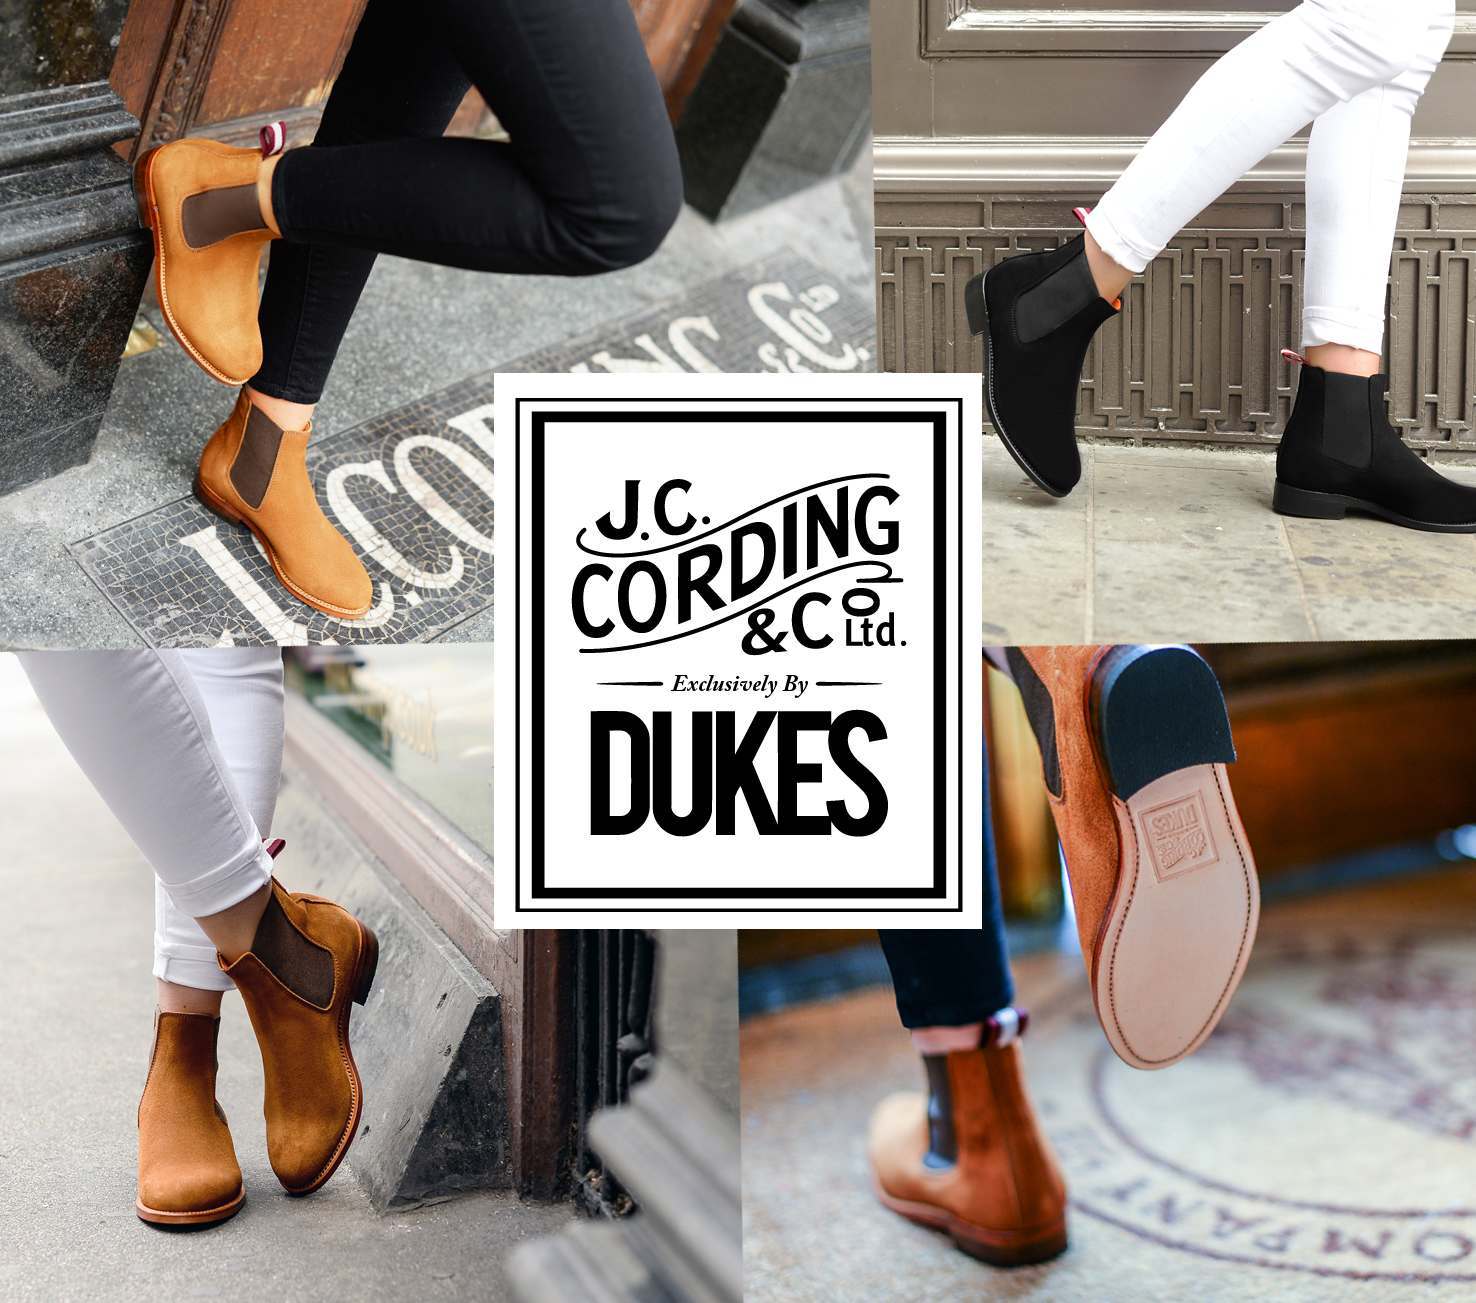 Dukes X Cordings Collaboration Boot: An Interview with Daisy Duke